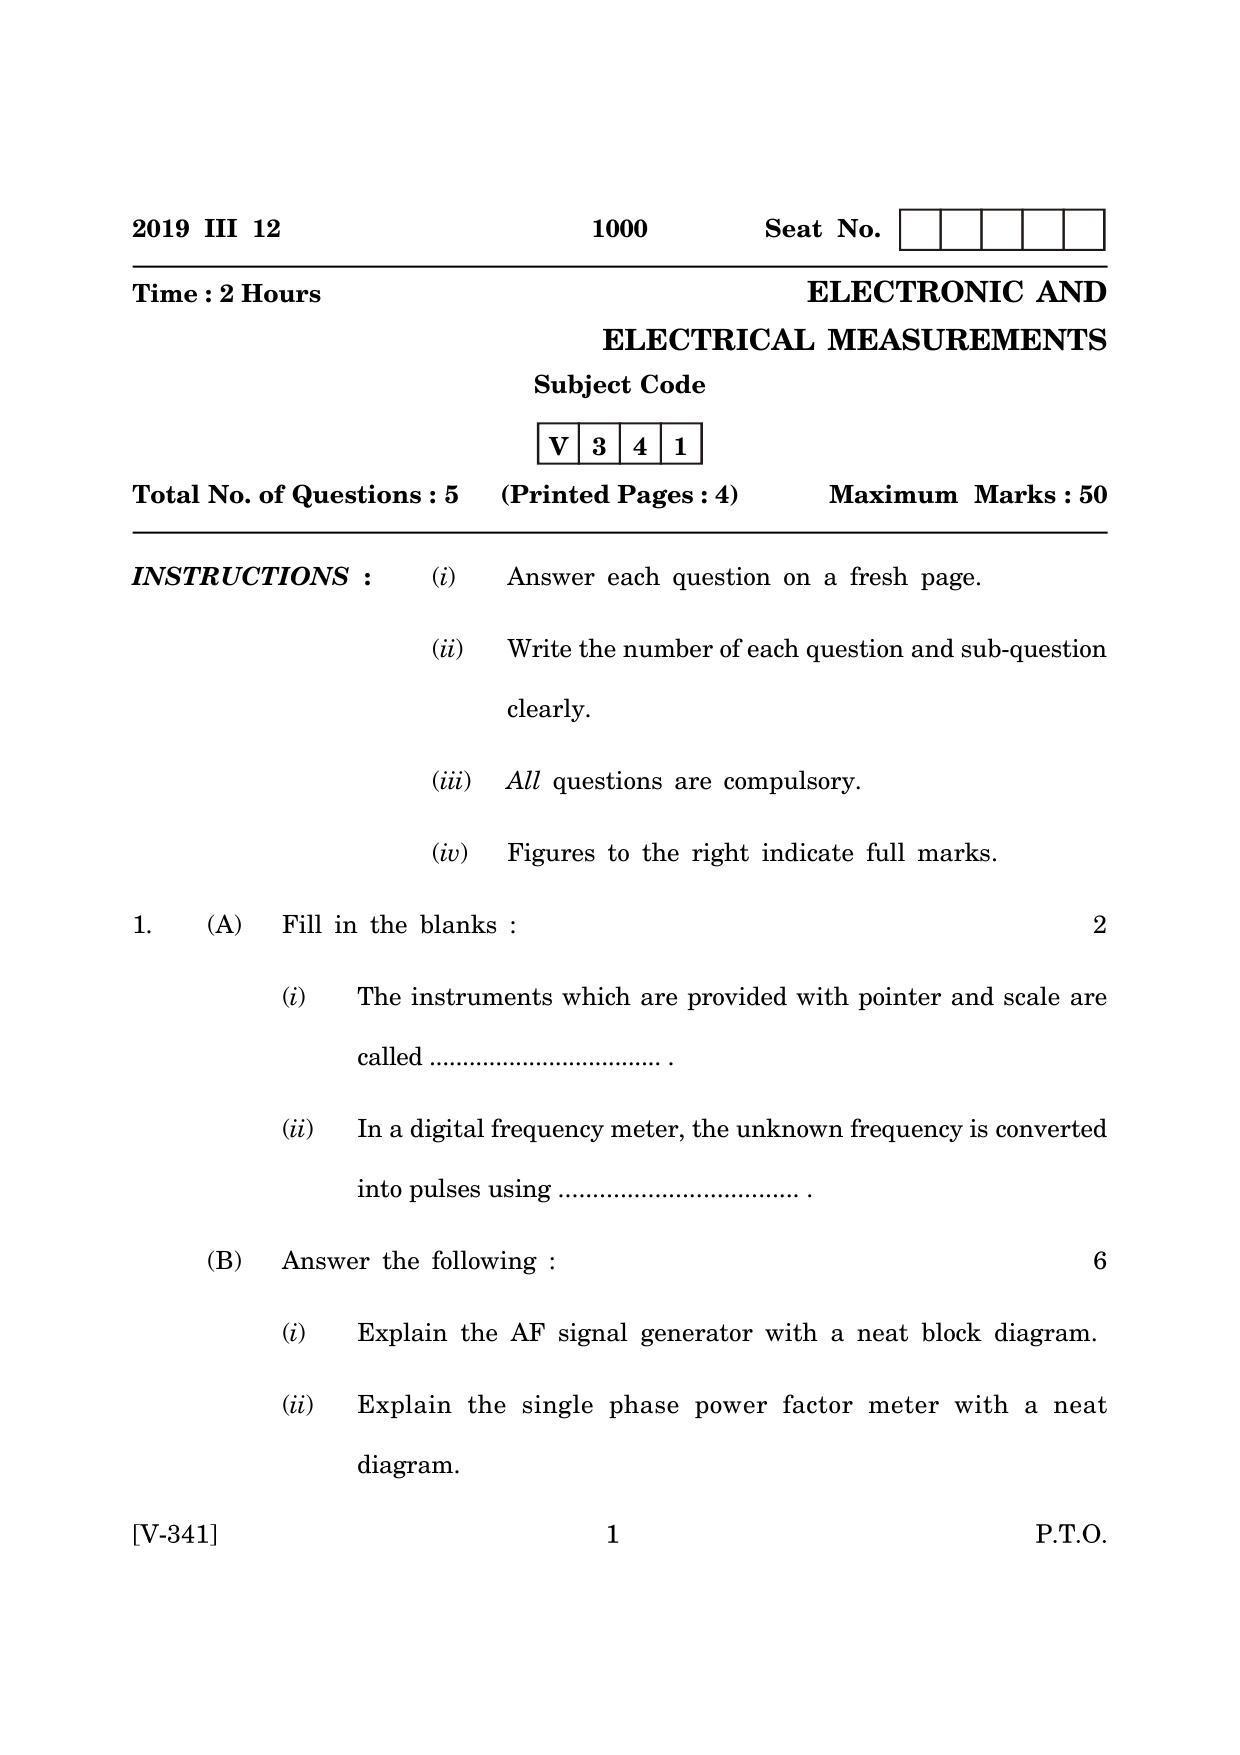 Goa Board Class 12 Electronic and Electrical Measurements  2019 (March 2019) Question Paper - Page 1